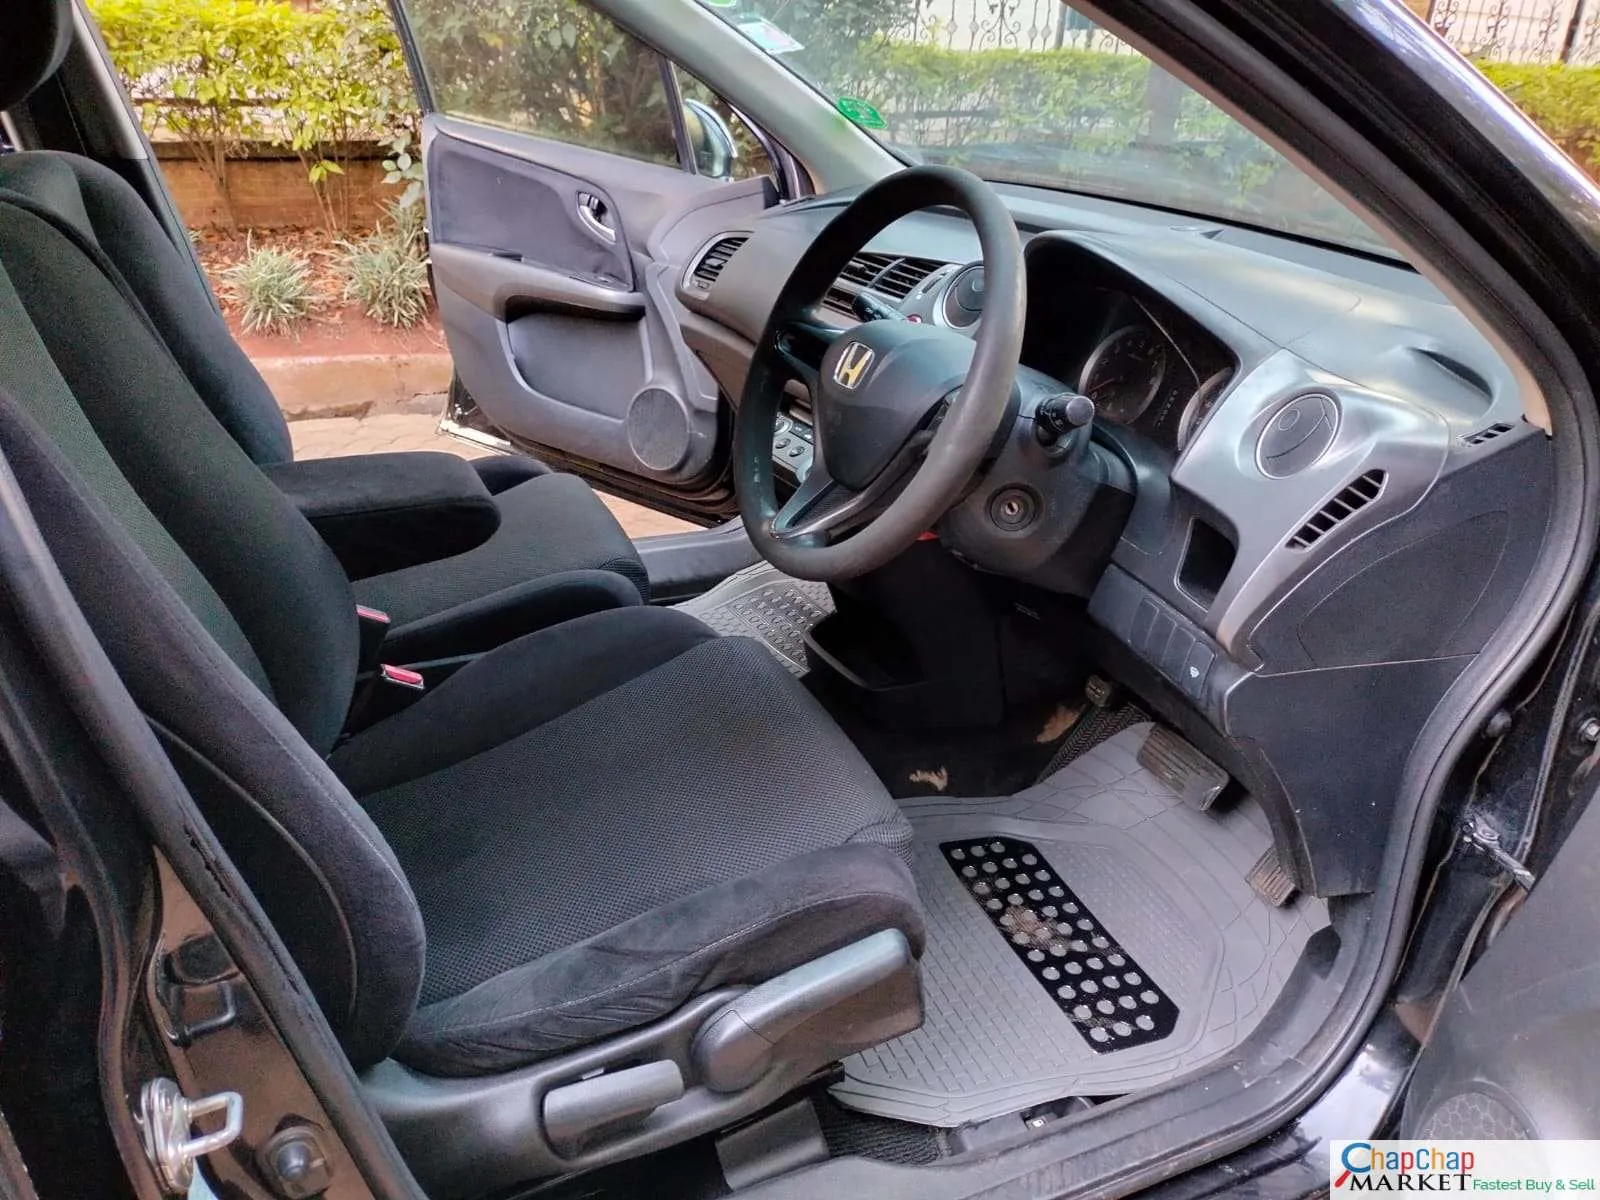 Honda Stream for sale in kenya hire purchase installments You Pay 30% Deposit stream rsz Trade in OK 1800cc EXCLUSIVE (SOLD)